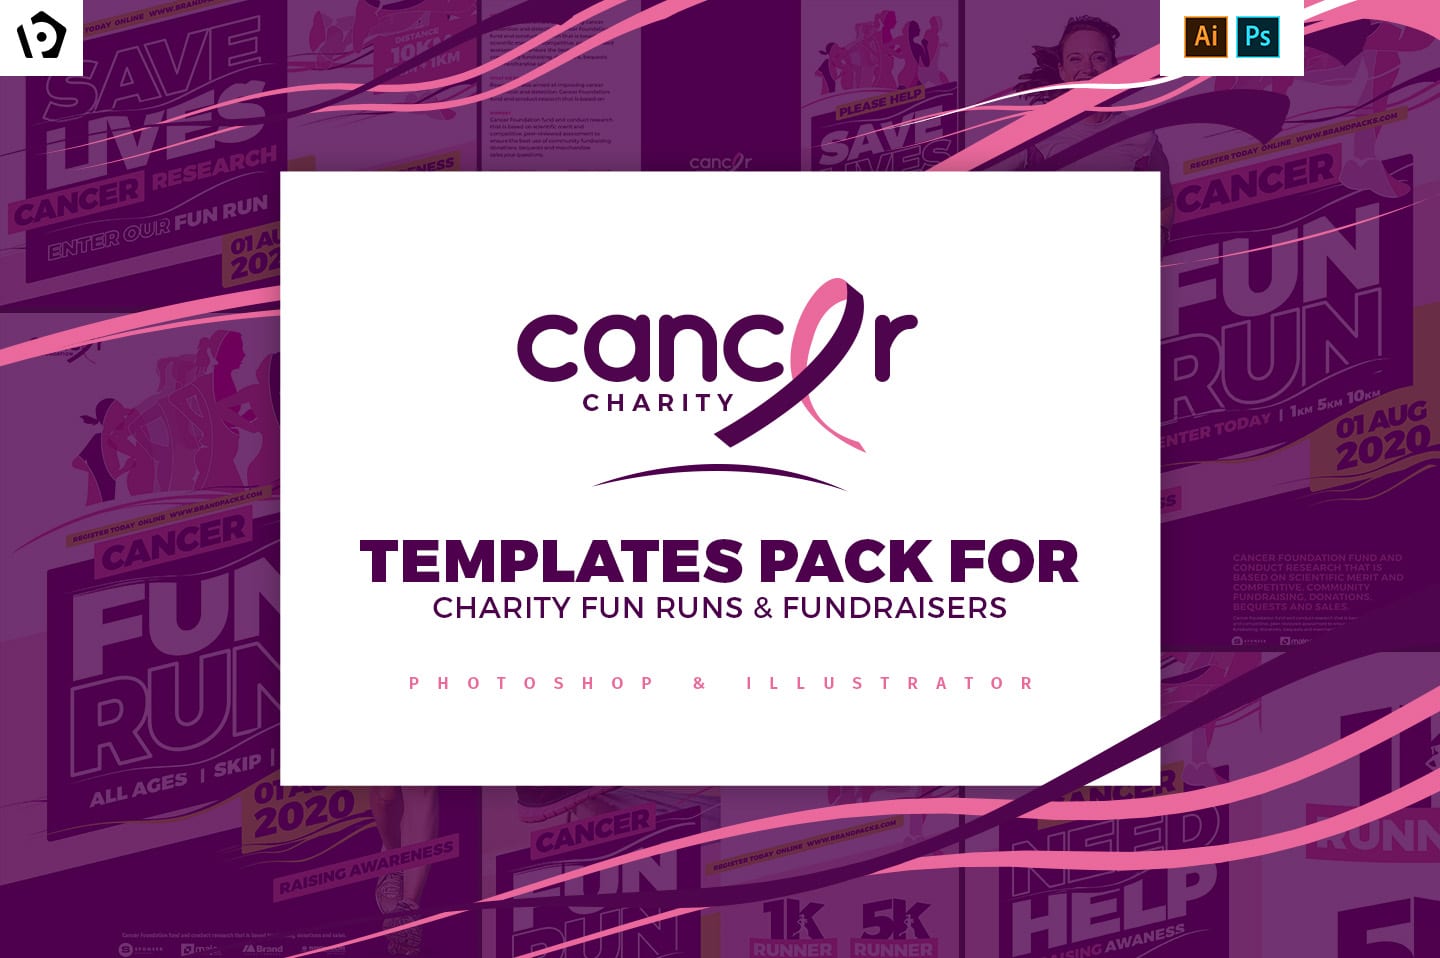 Cancer Charity Templates Pack